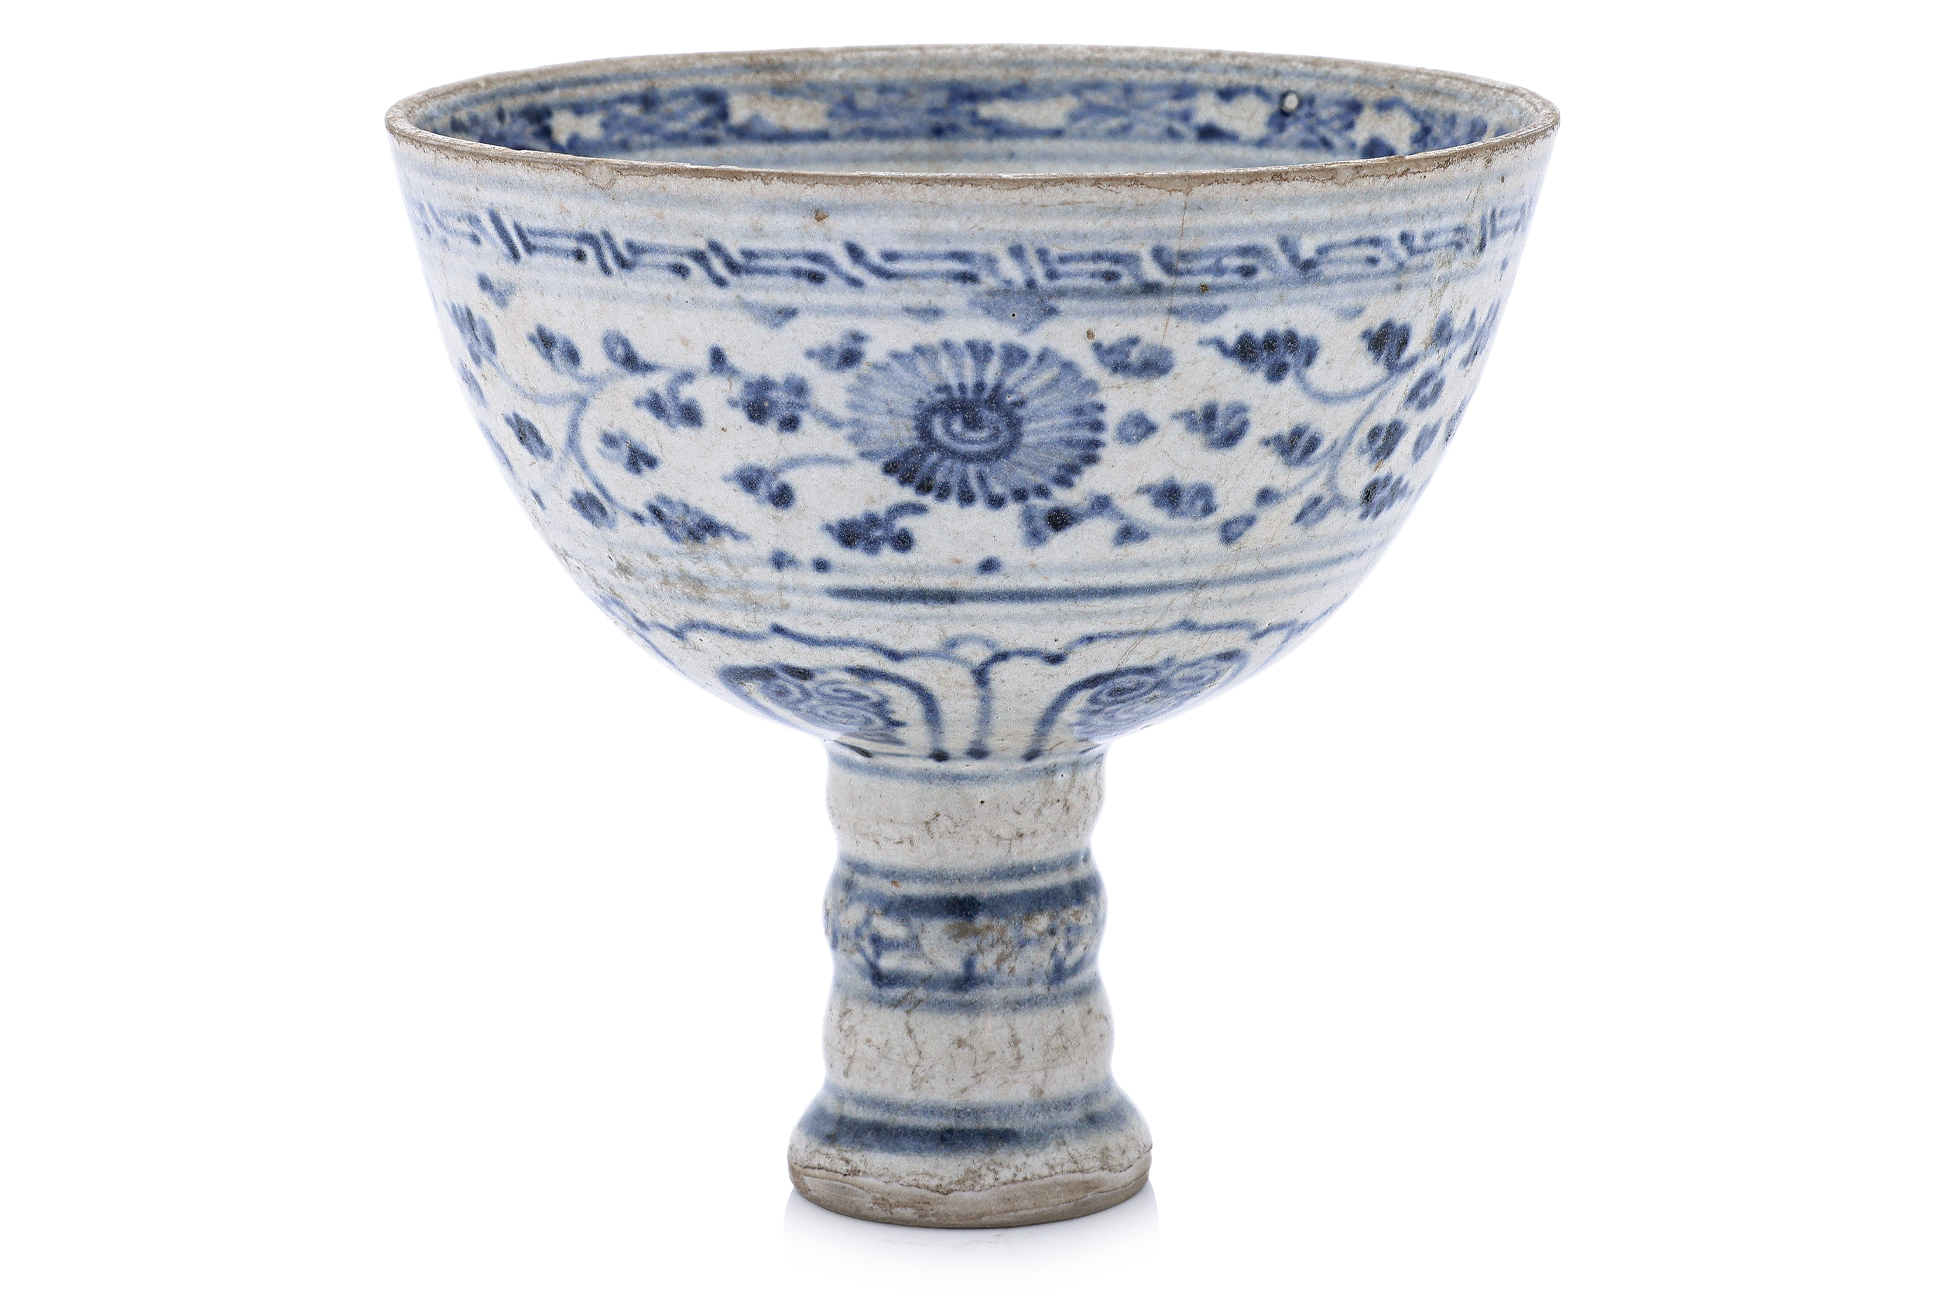 A VIETNAMESE BLUE AND WHITE STEM CUP